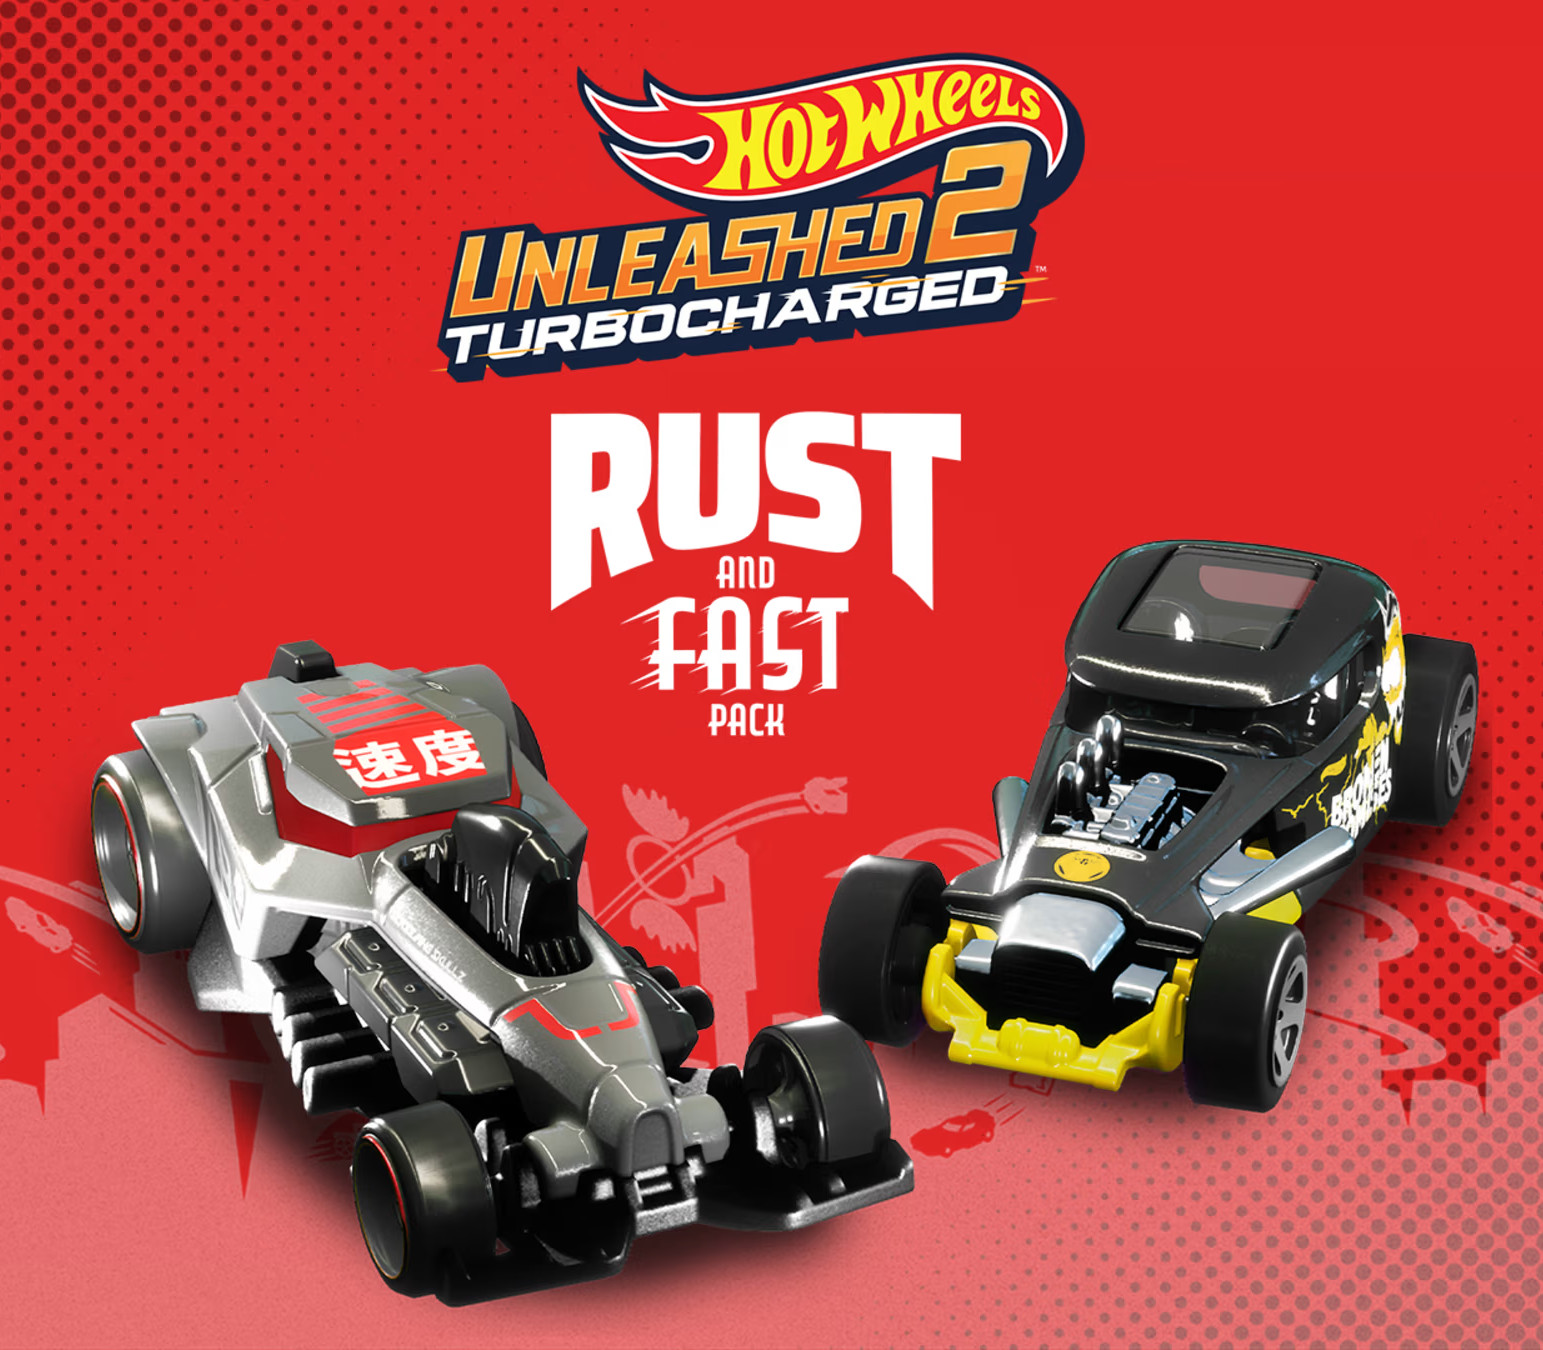 Hot Wheels Unleashed 2 Turbocharged - Rust and Fast Pack DLC EU PS4